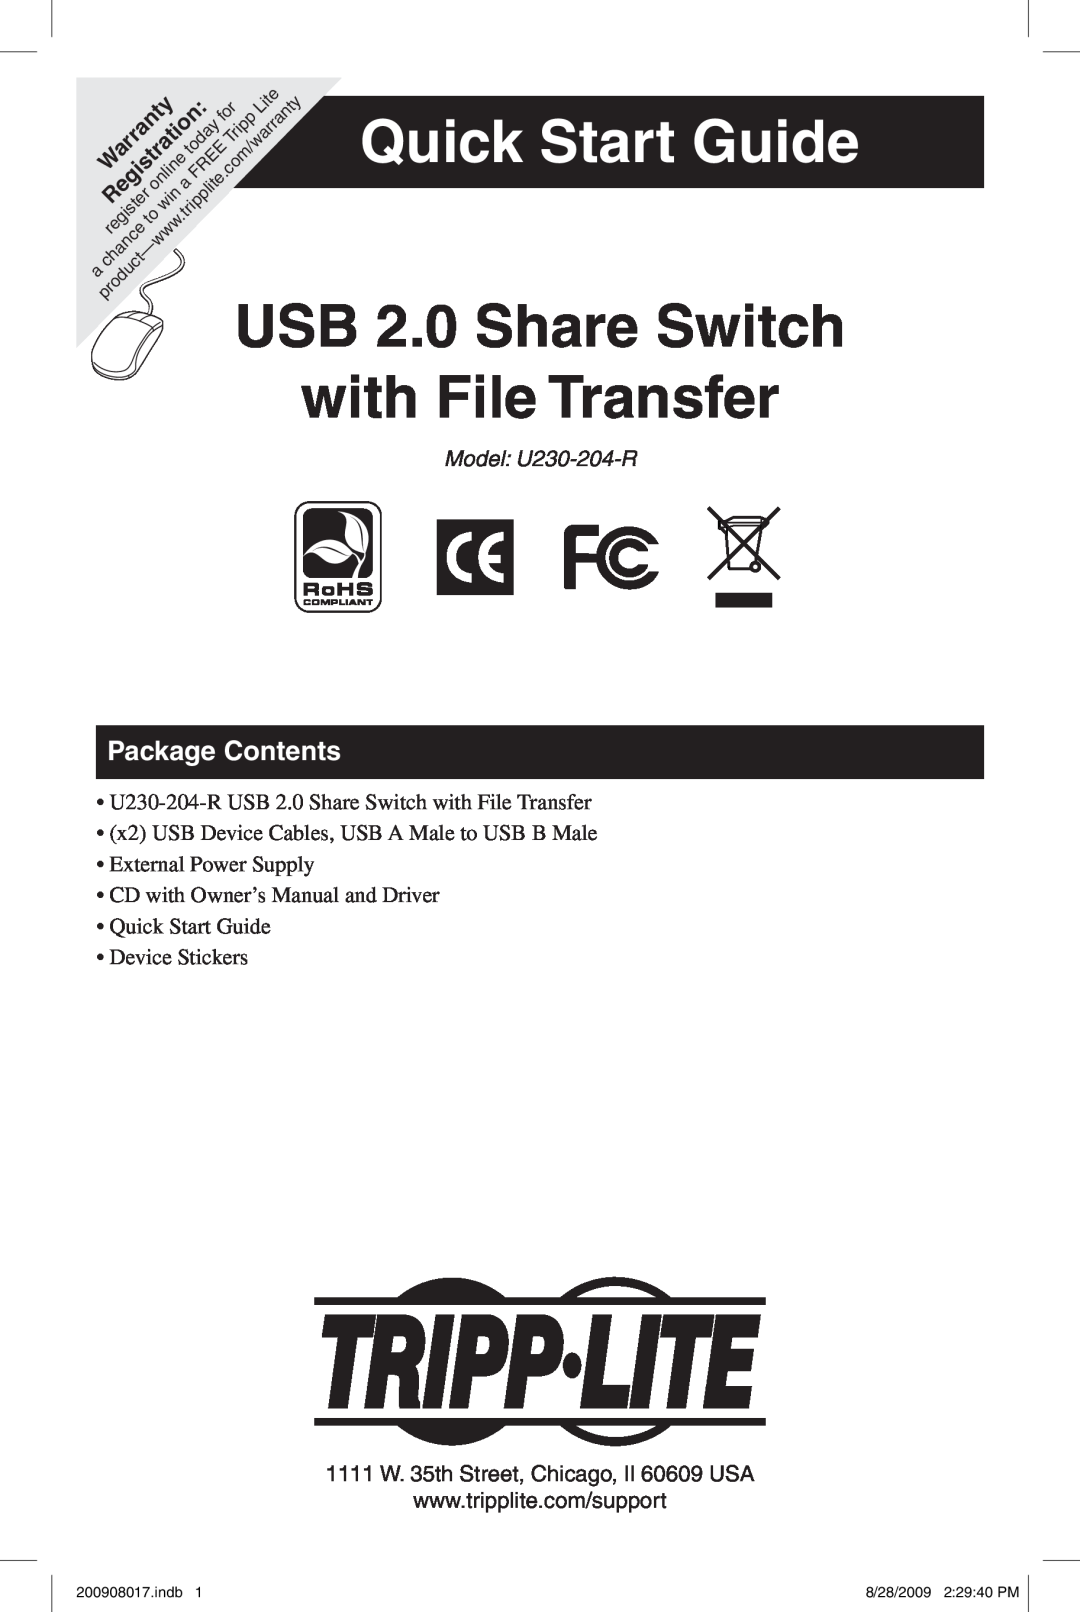 Tripp Lite U230-204-R owner manual Owner’s Manual, USB 2.0 Share Switch with File Transfer, Package Contents, Features 